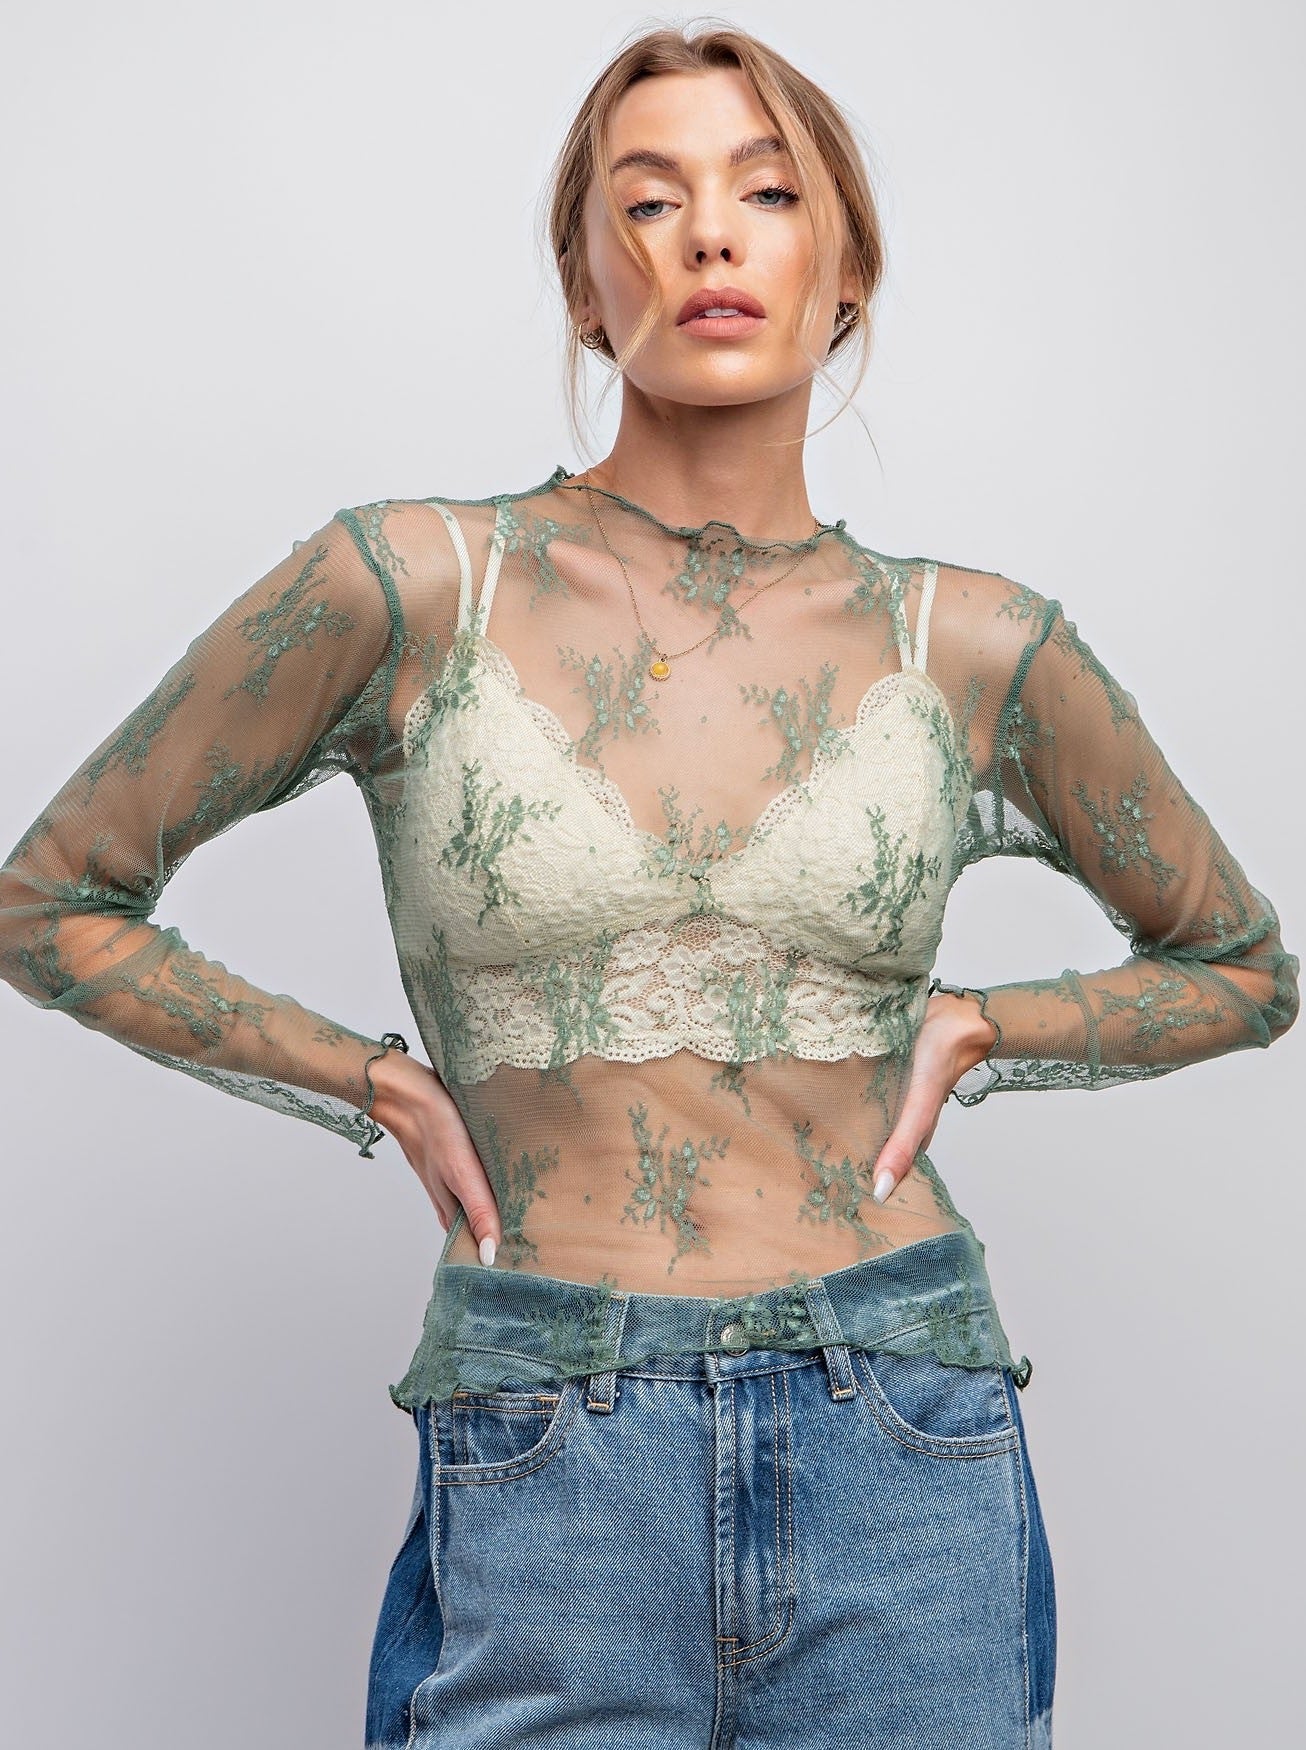 Lex Sheer Lace Top, Sage Green